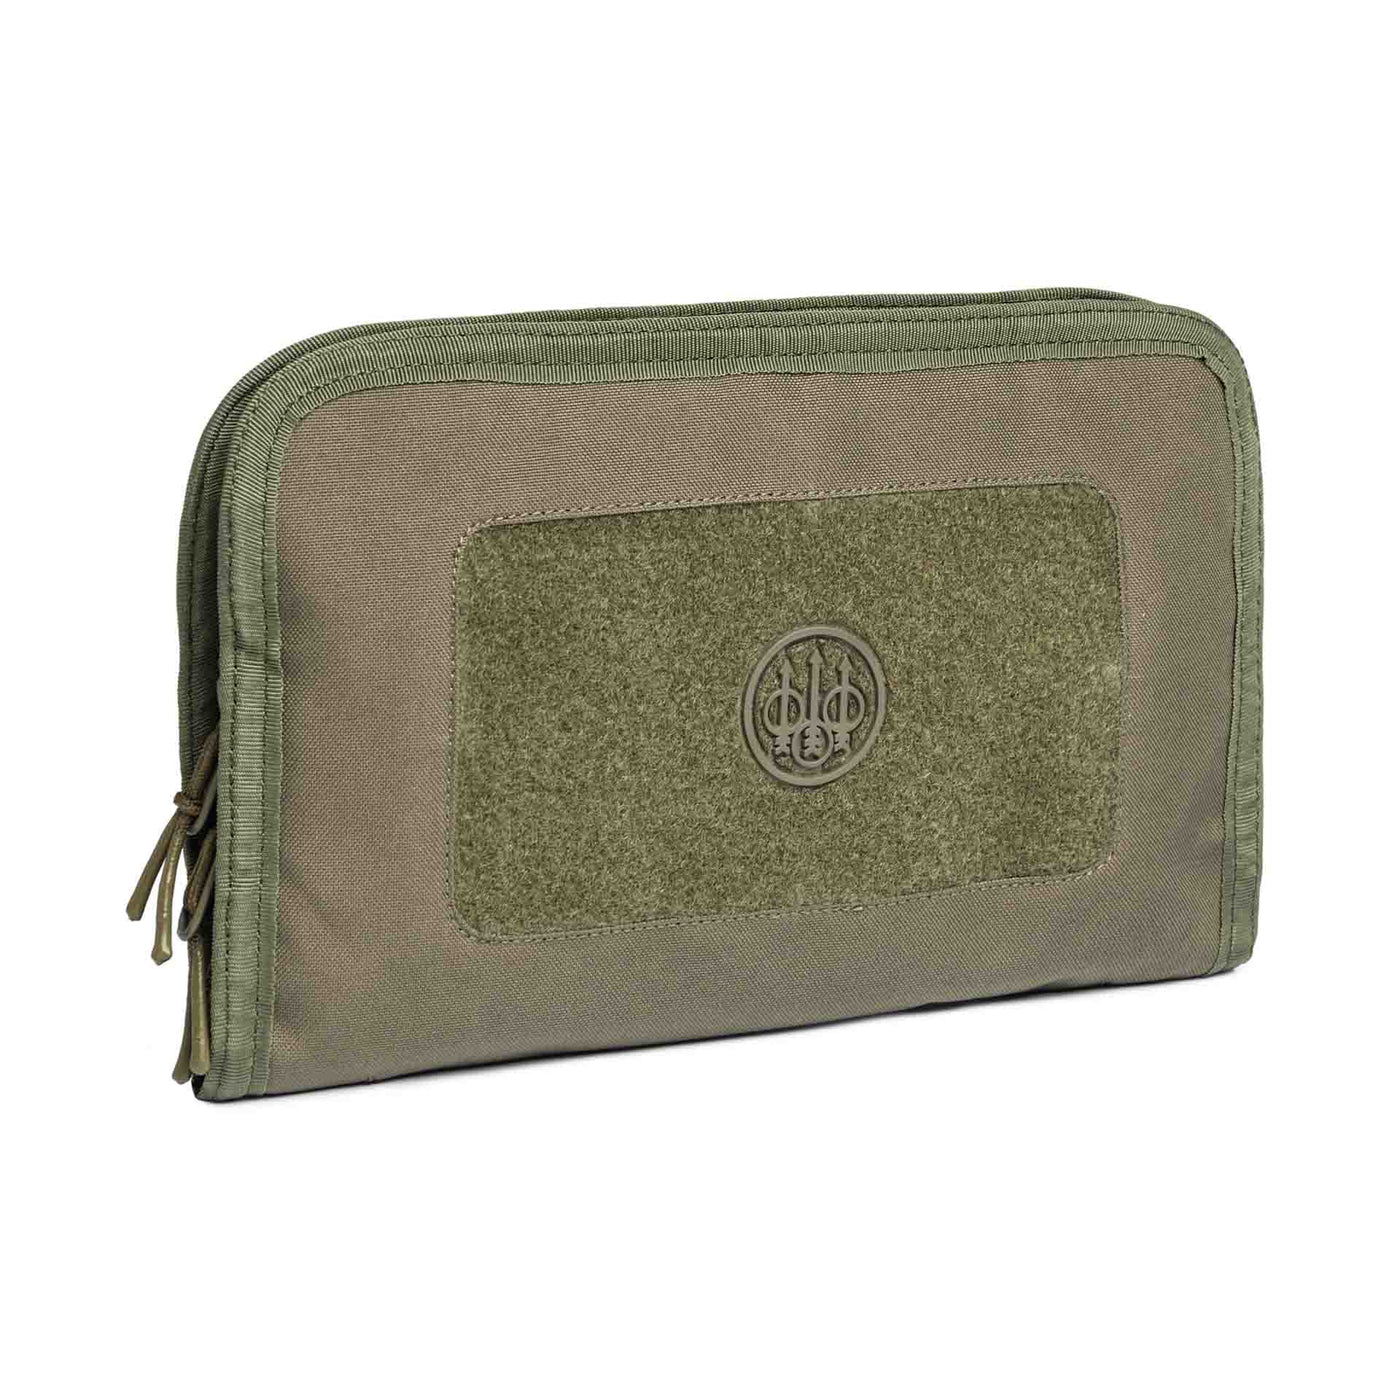 Tactical Organizer Pouch with MOLLE system